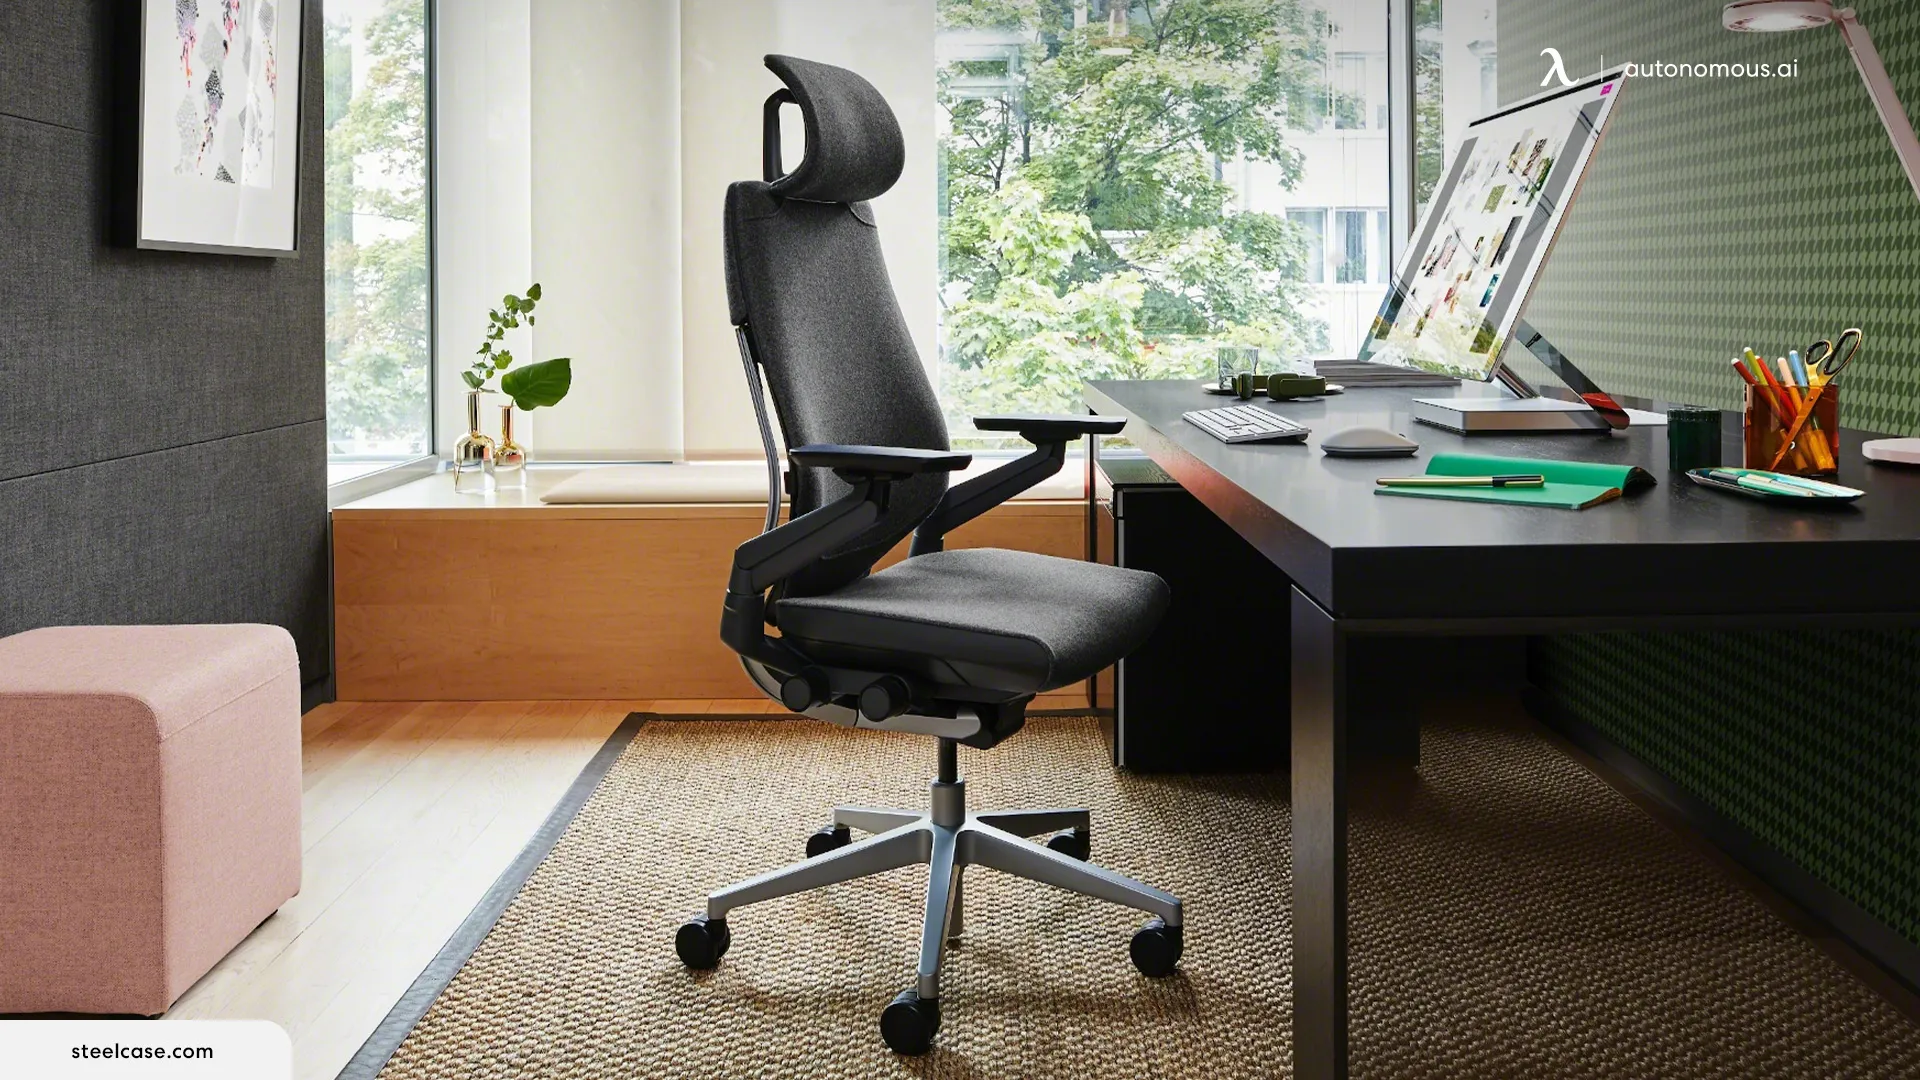 Steelcase Survey: Most Office Workers in Pain Due to Office Chairs